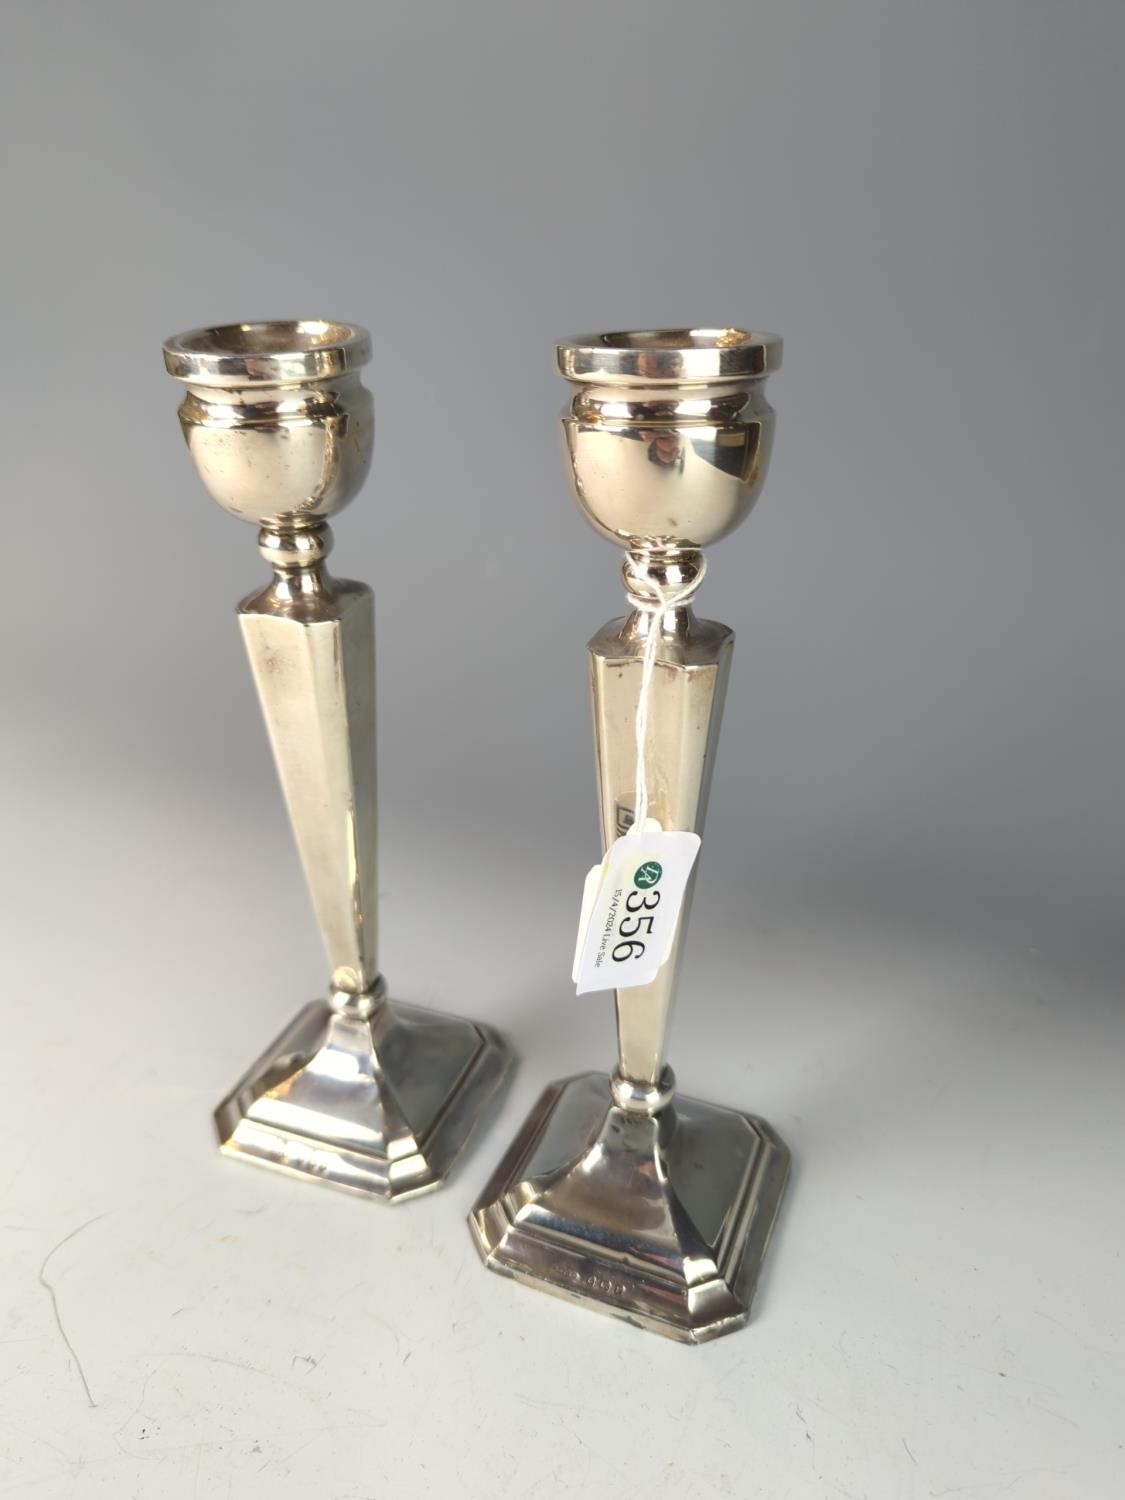 Pair of silver candlesticks, Britton, Gould & Co, Birmingham 1939, each with urn-shaped nozzles, tap - Image 3 of 3